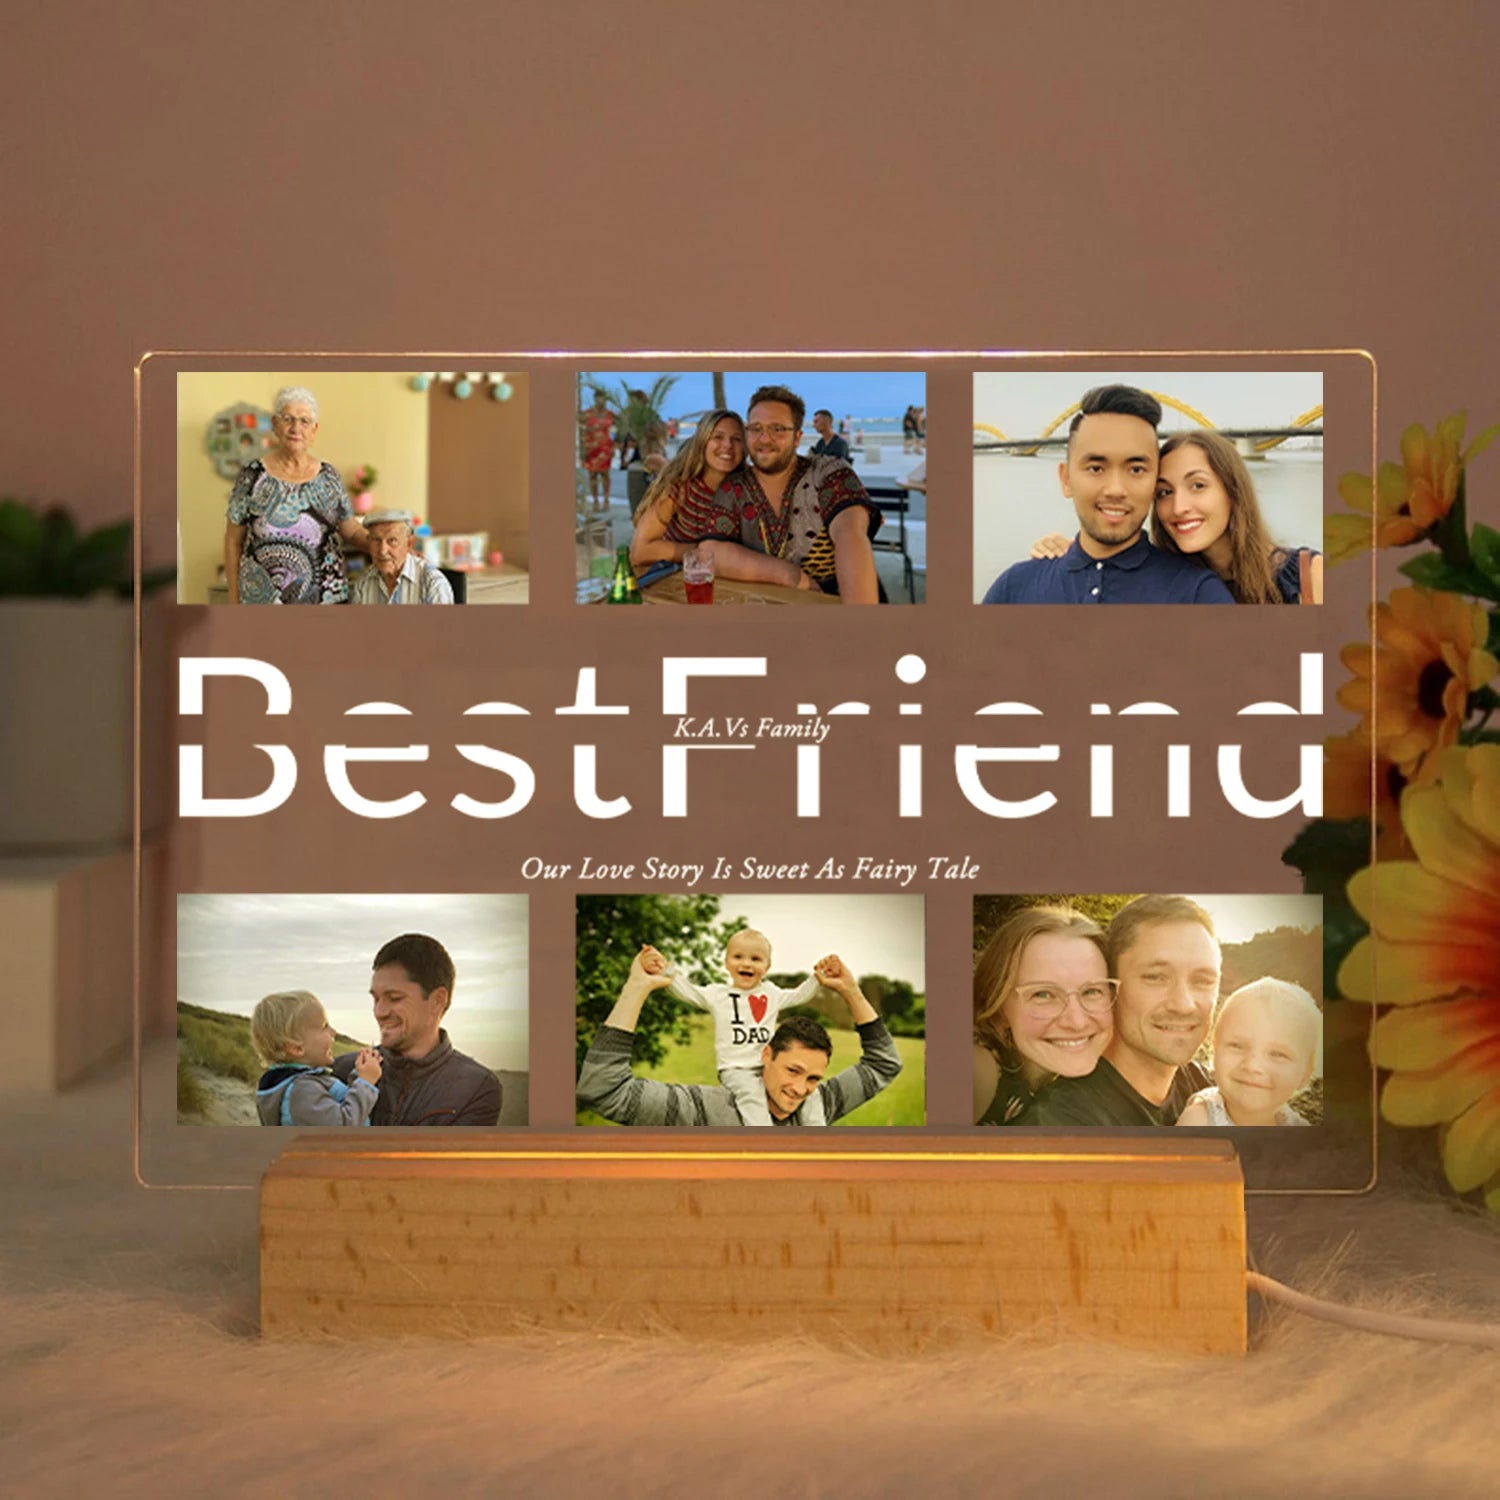 Personalized Custom Photo Text 3D Acrylic Lamp - Customized Bedroom Night Light for MOM DAD LOVE Family Day Christmas Birthday Gift Warm Light / BestFriend